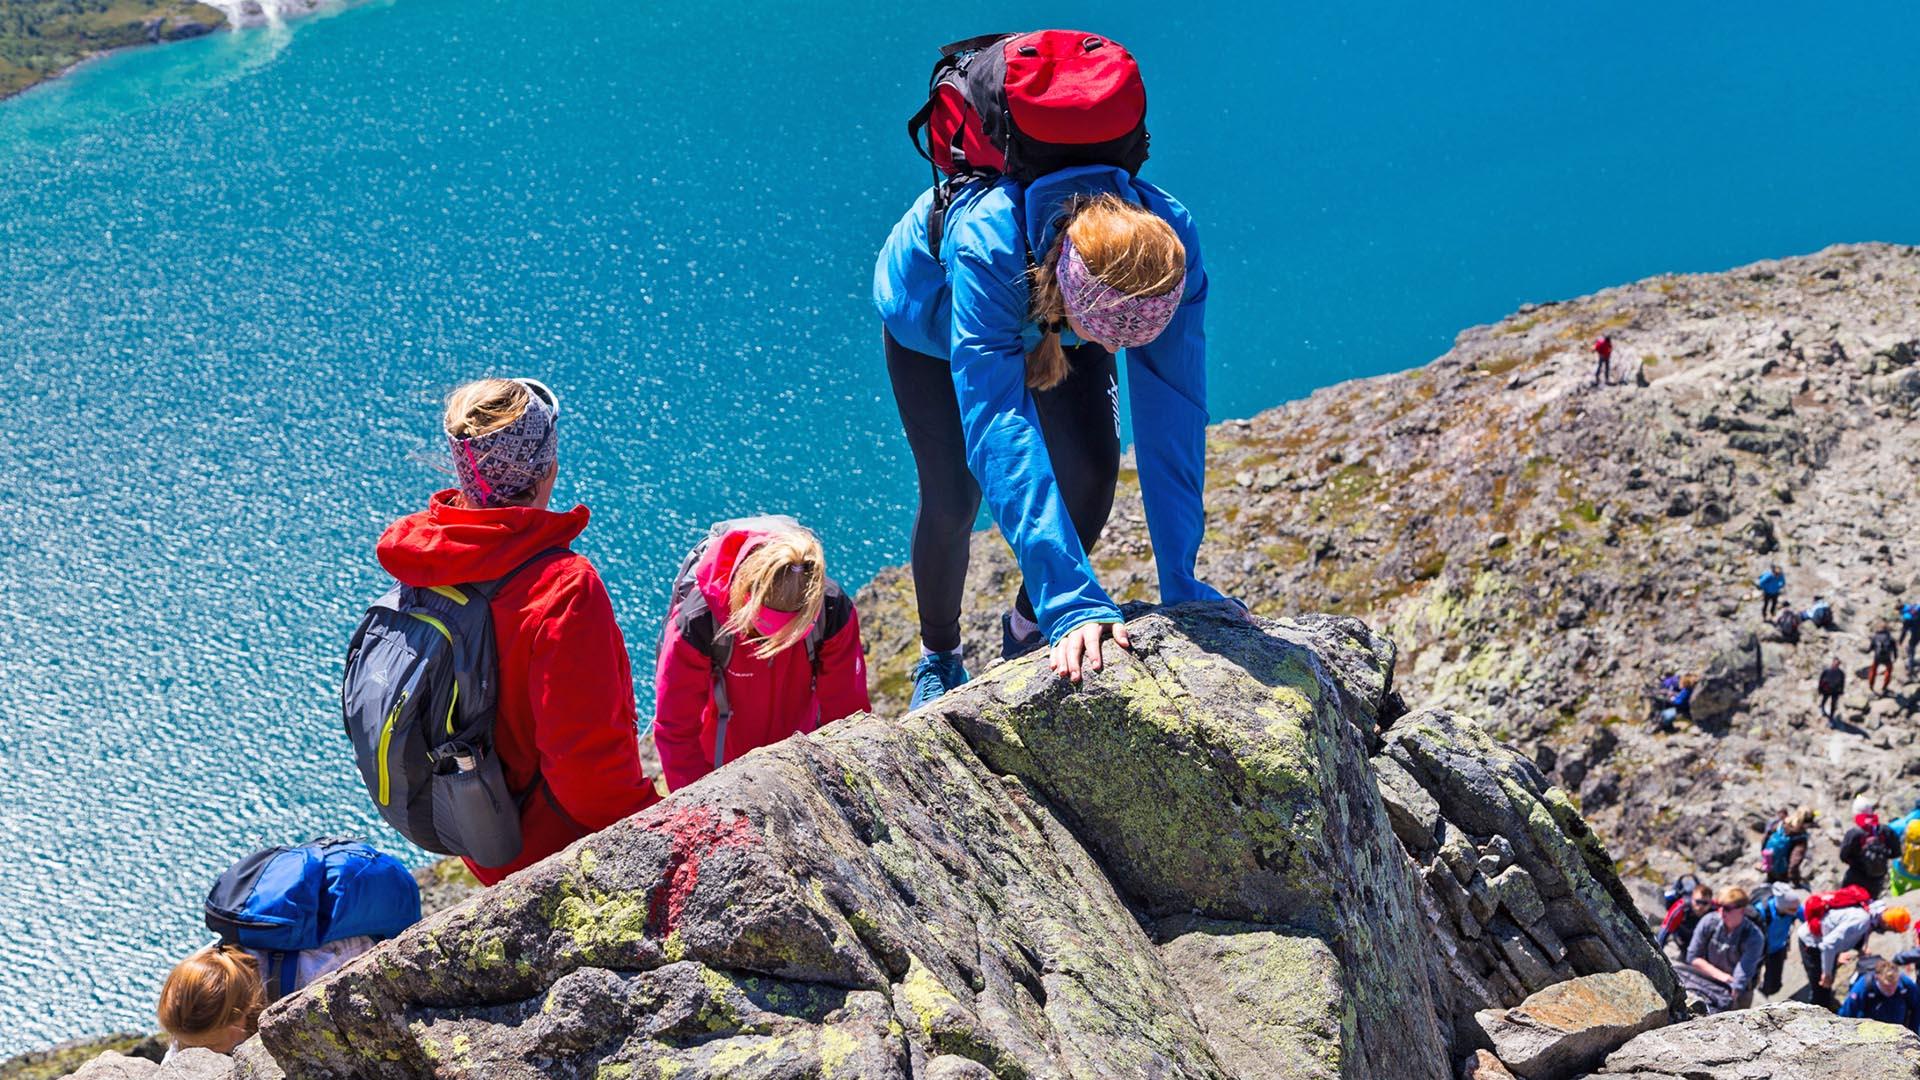 Children scramble opp a slightly exposed section of a rocky ridge in the mountains that lies above a green-blue lake.